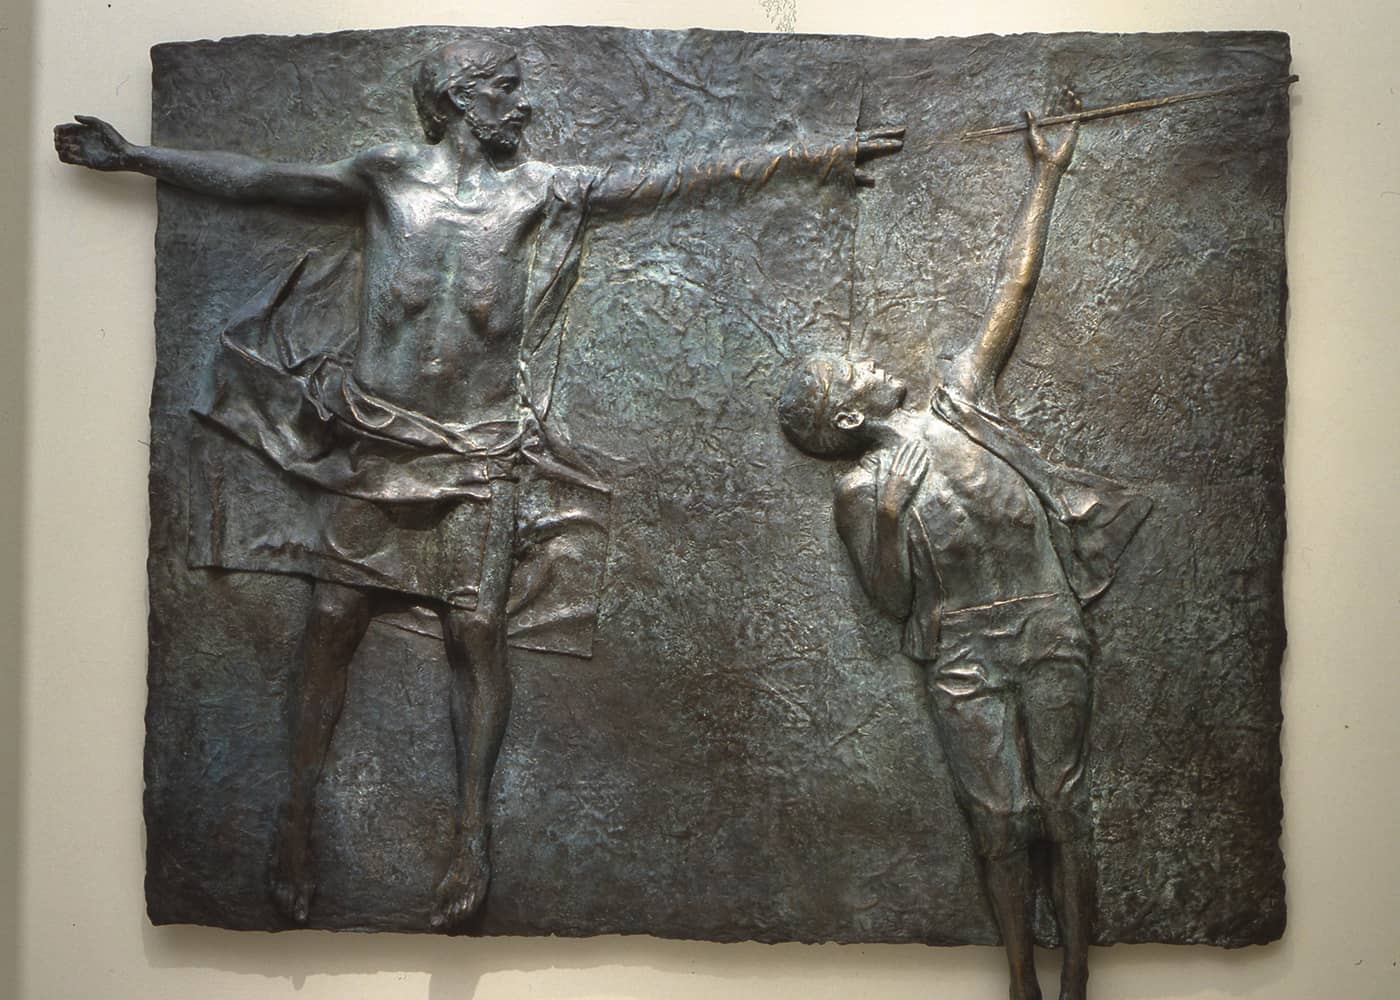 A metal art piece depicting a boy reaching out to an iron rod, with help from Jesus Christ